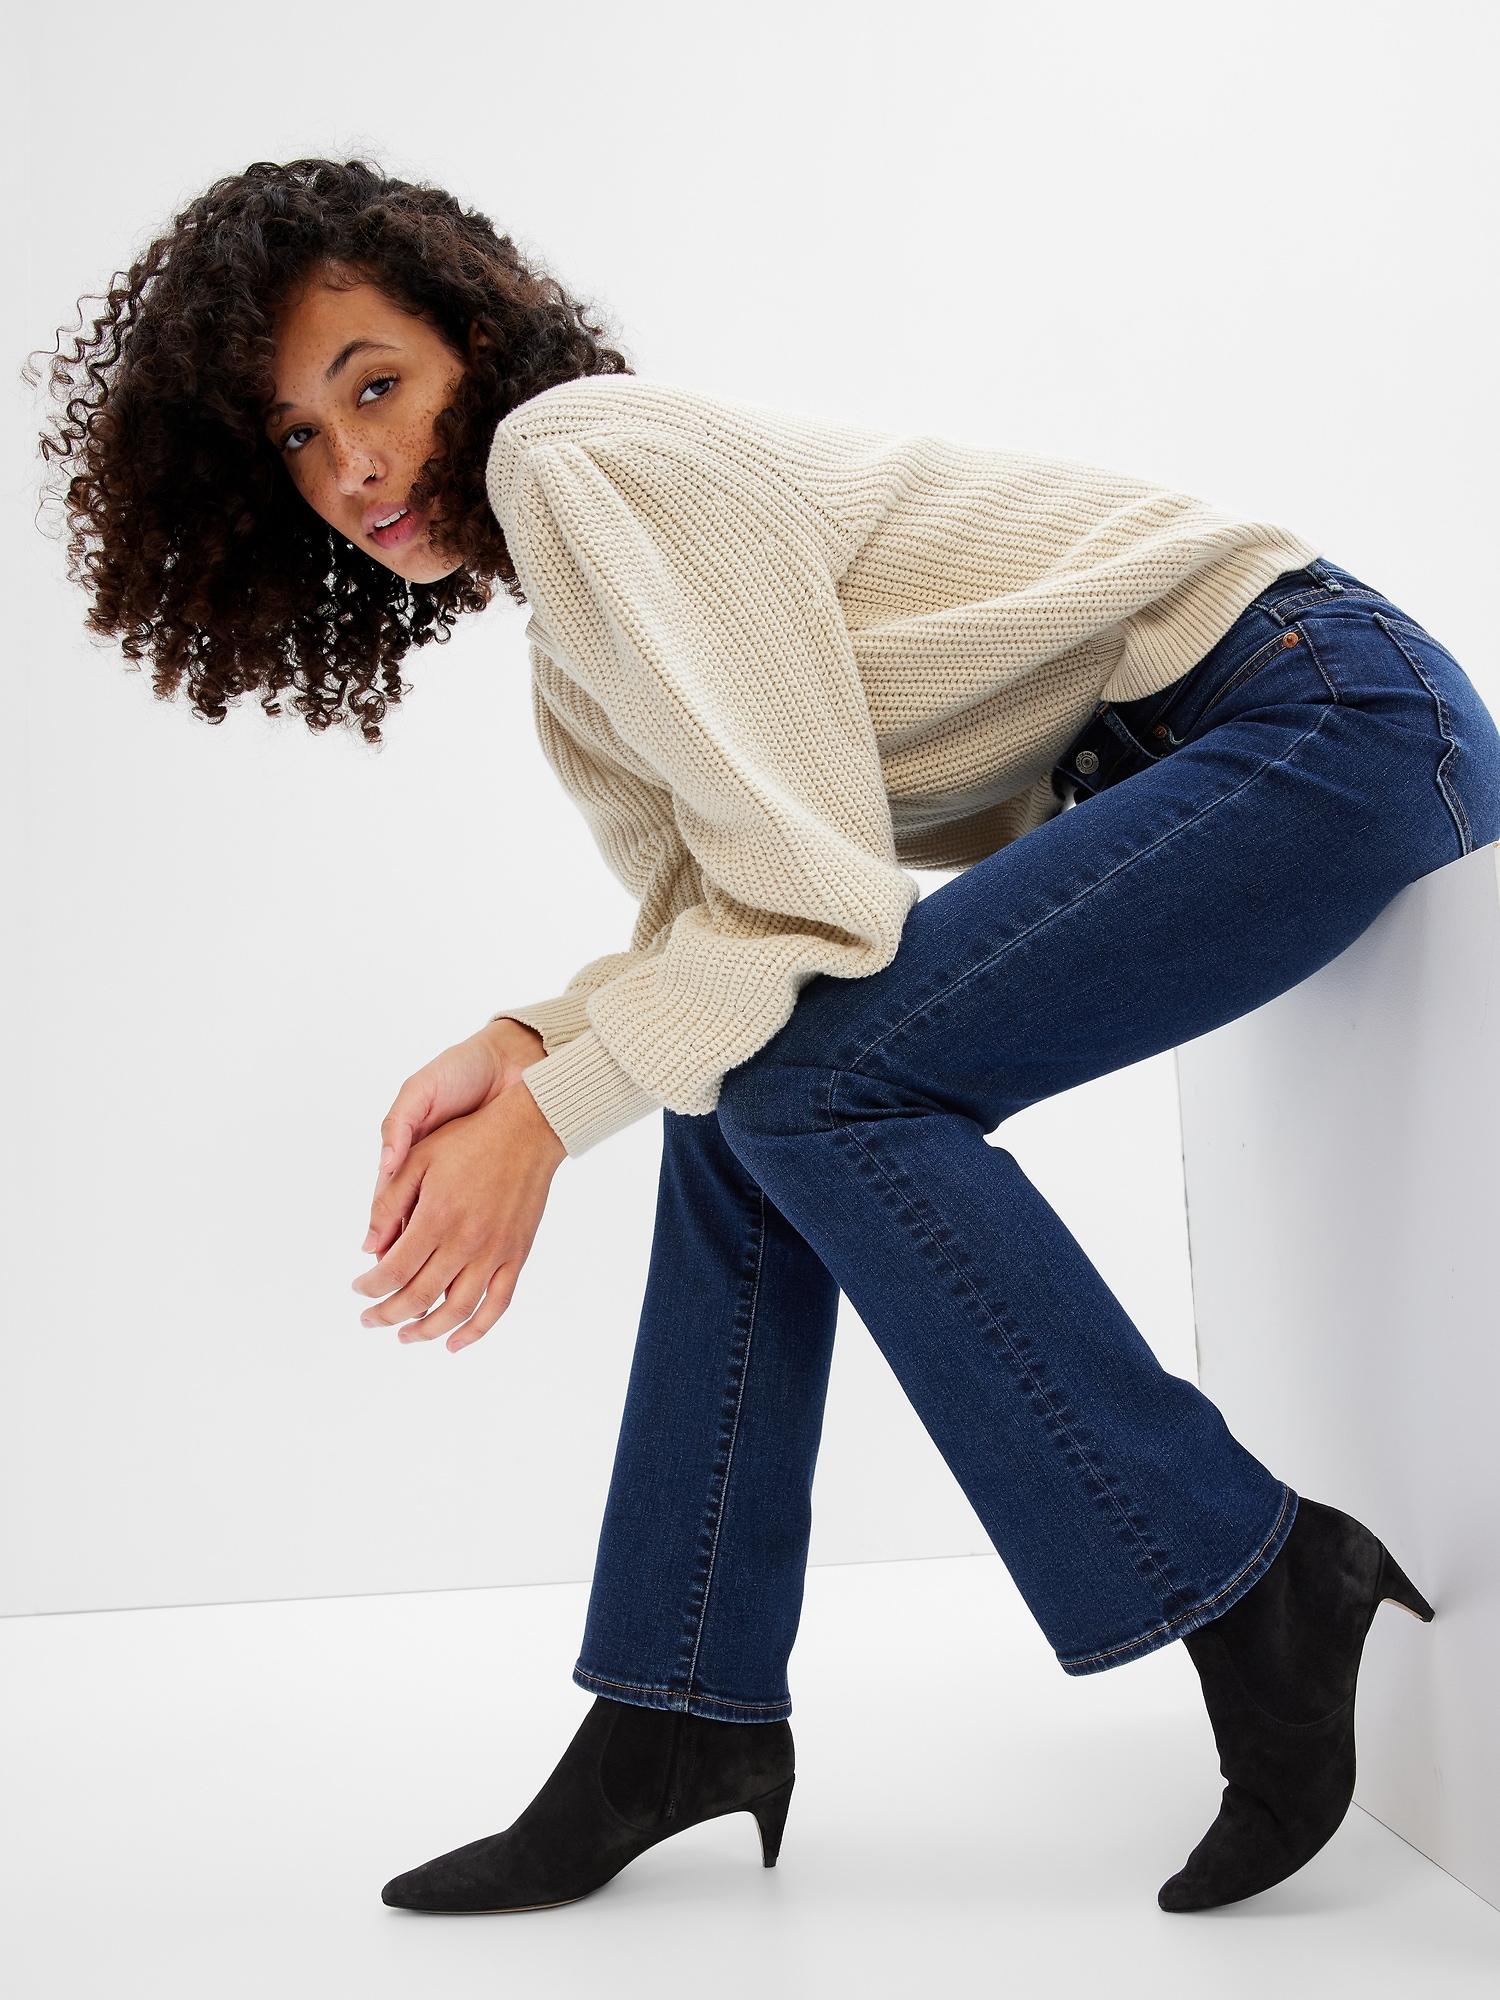 Mid Rise Baby Boot Jeans | Gap